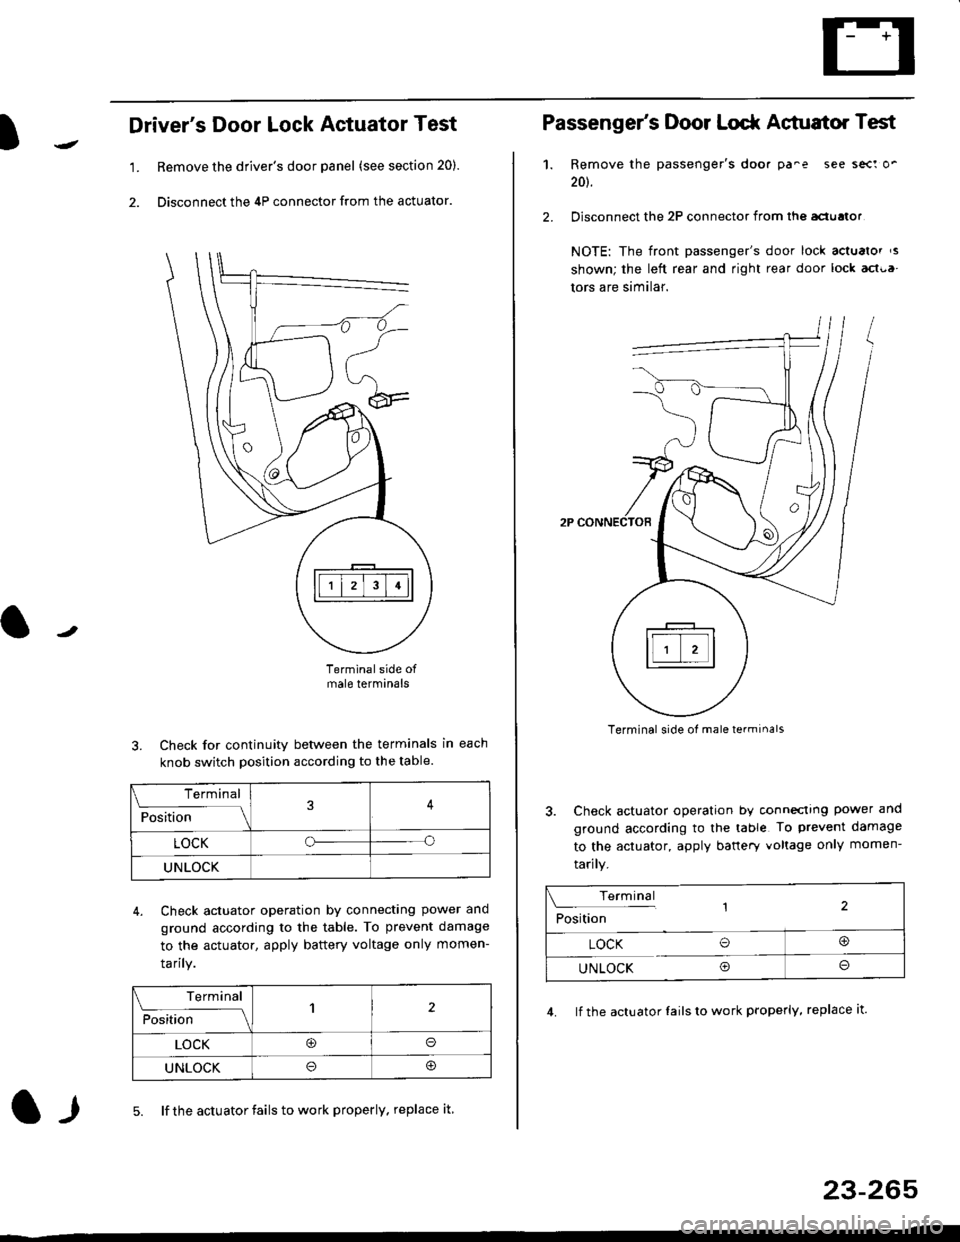 HONDA CIVIC 1997 6.G Owners Guide l
Drivers Door Lock Actuator Test
1. Remove the drivers door panel (see section 20).
2. Disconnect the 4P connector from the actuator.
J
Terminalside ofmale terminals
3. Check for continuity between